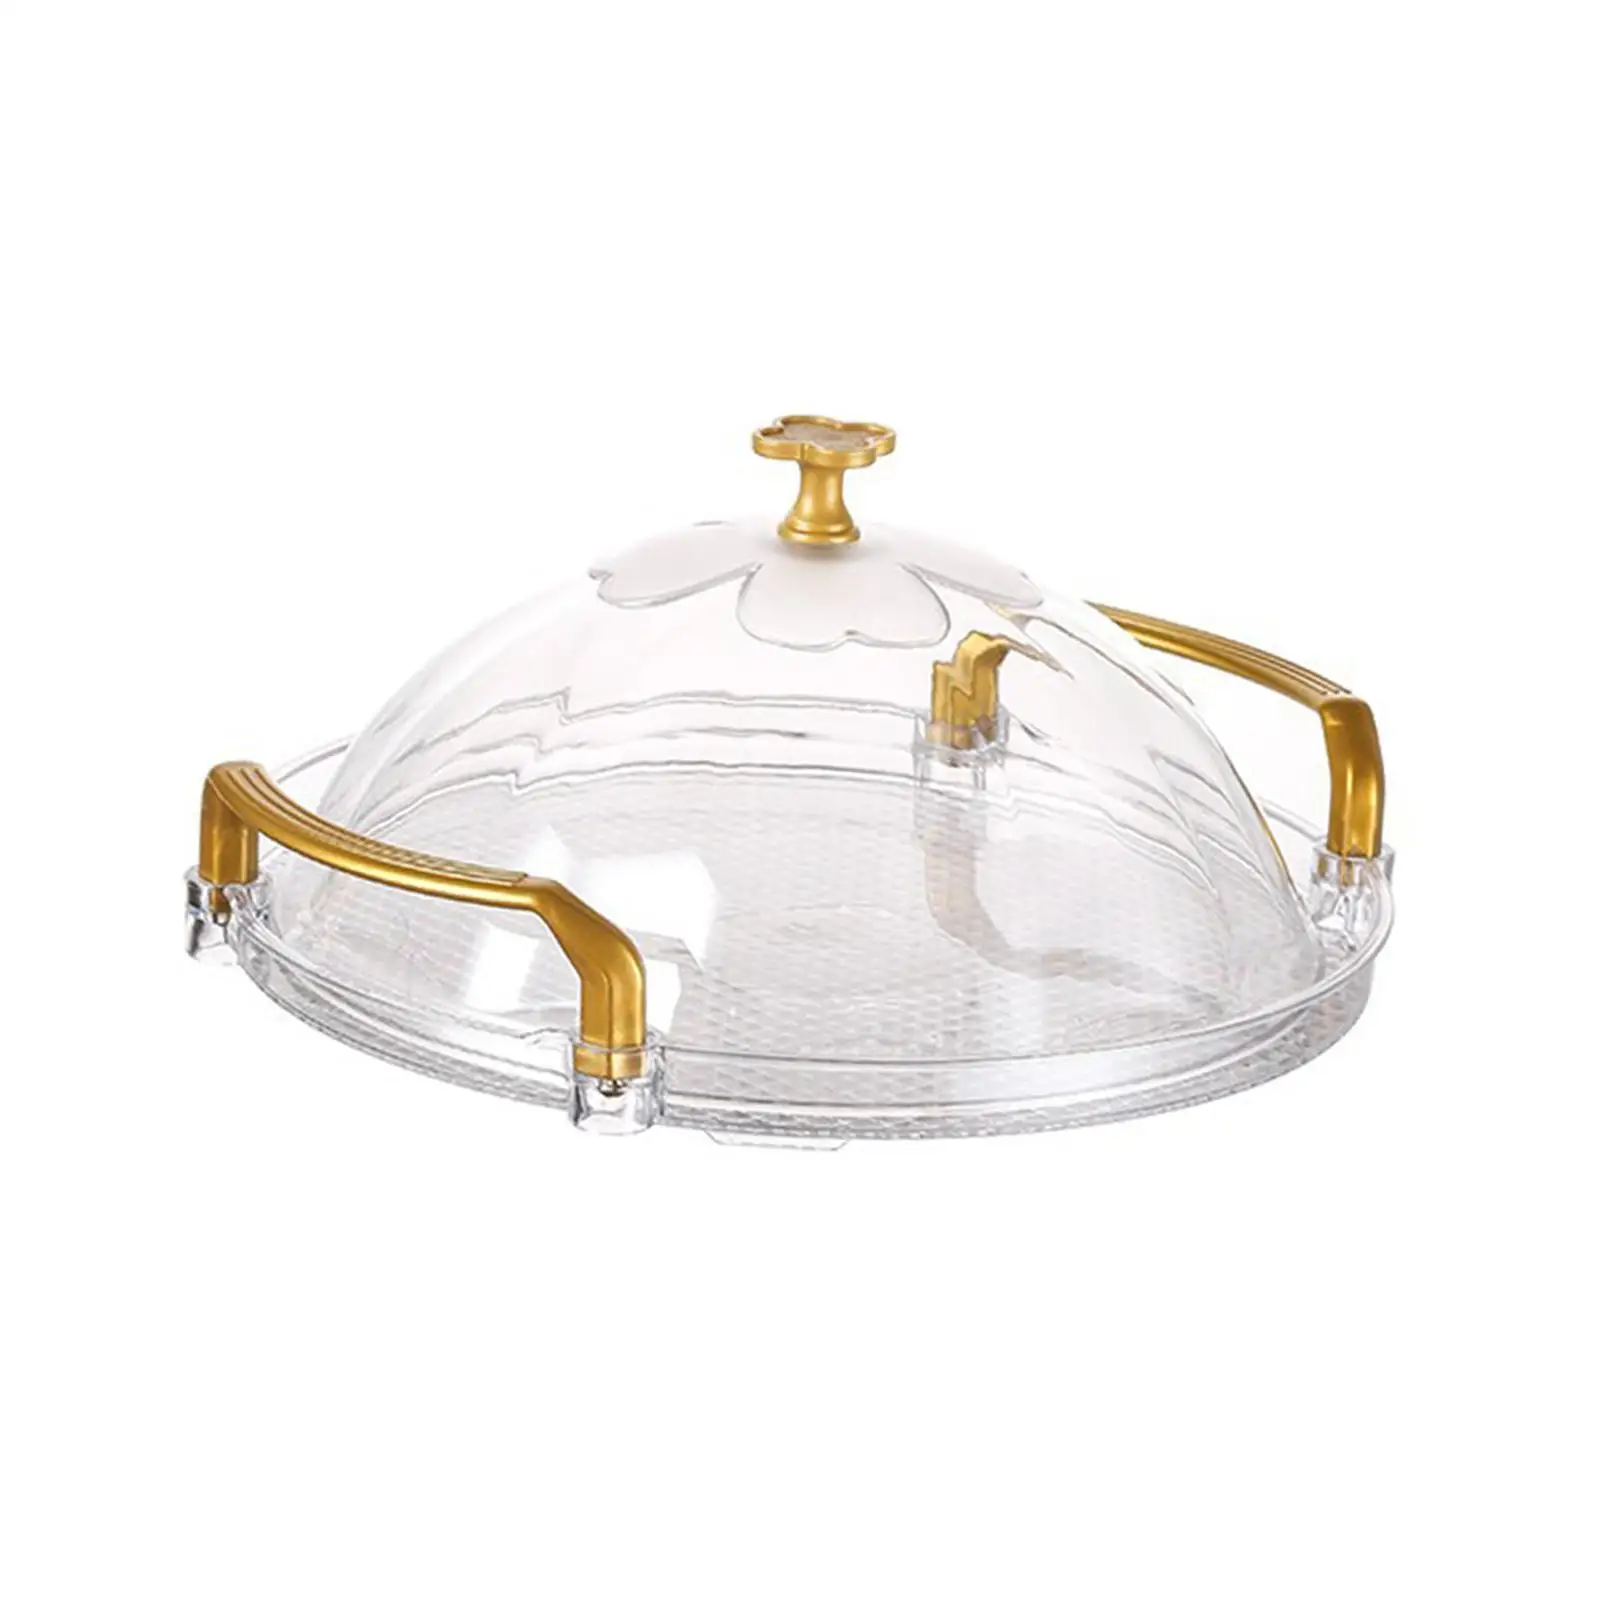 Cake Plate with Dome Serving Tray with Handle for Breakfast Tea Party